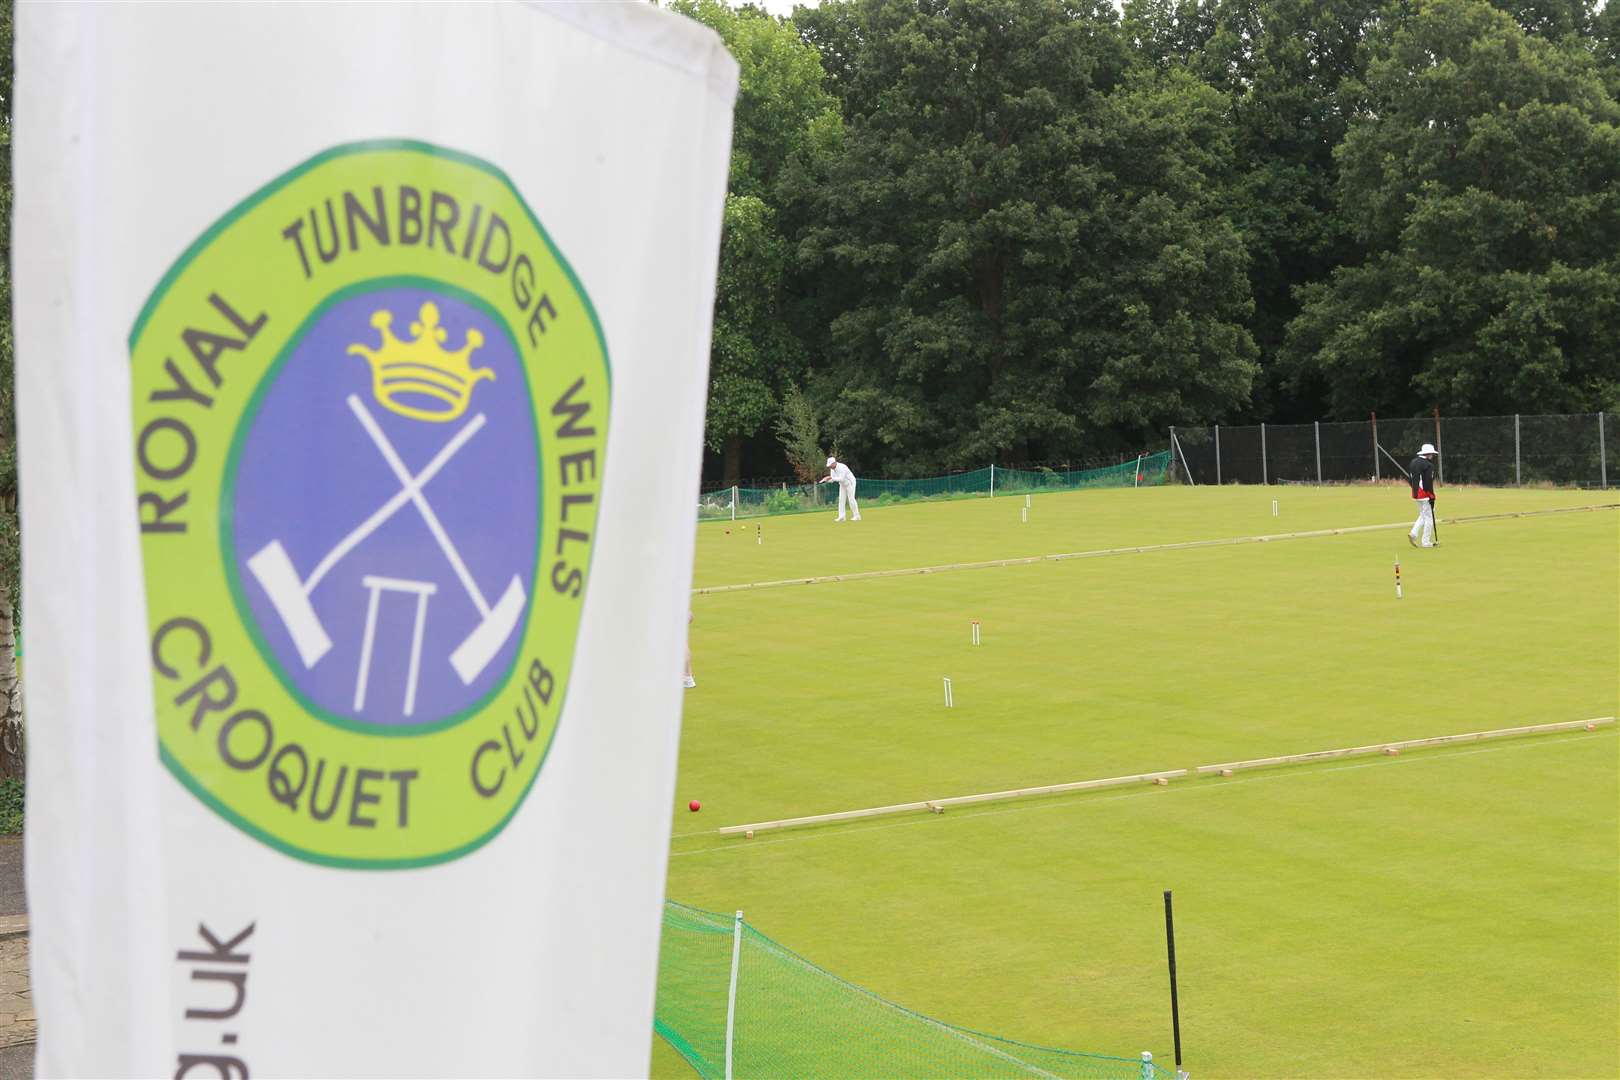 Competitive action has resumed at Royal Tunbridge Wells Croquet Club